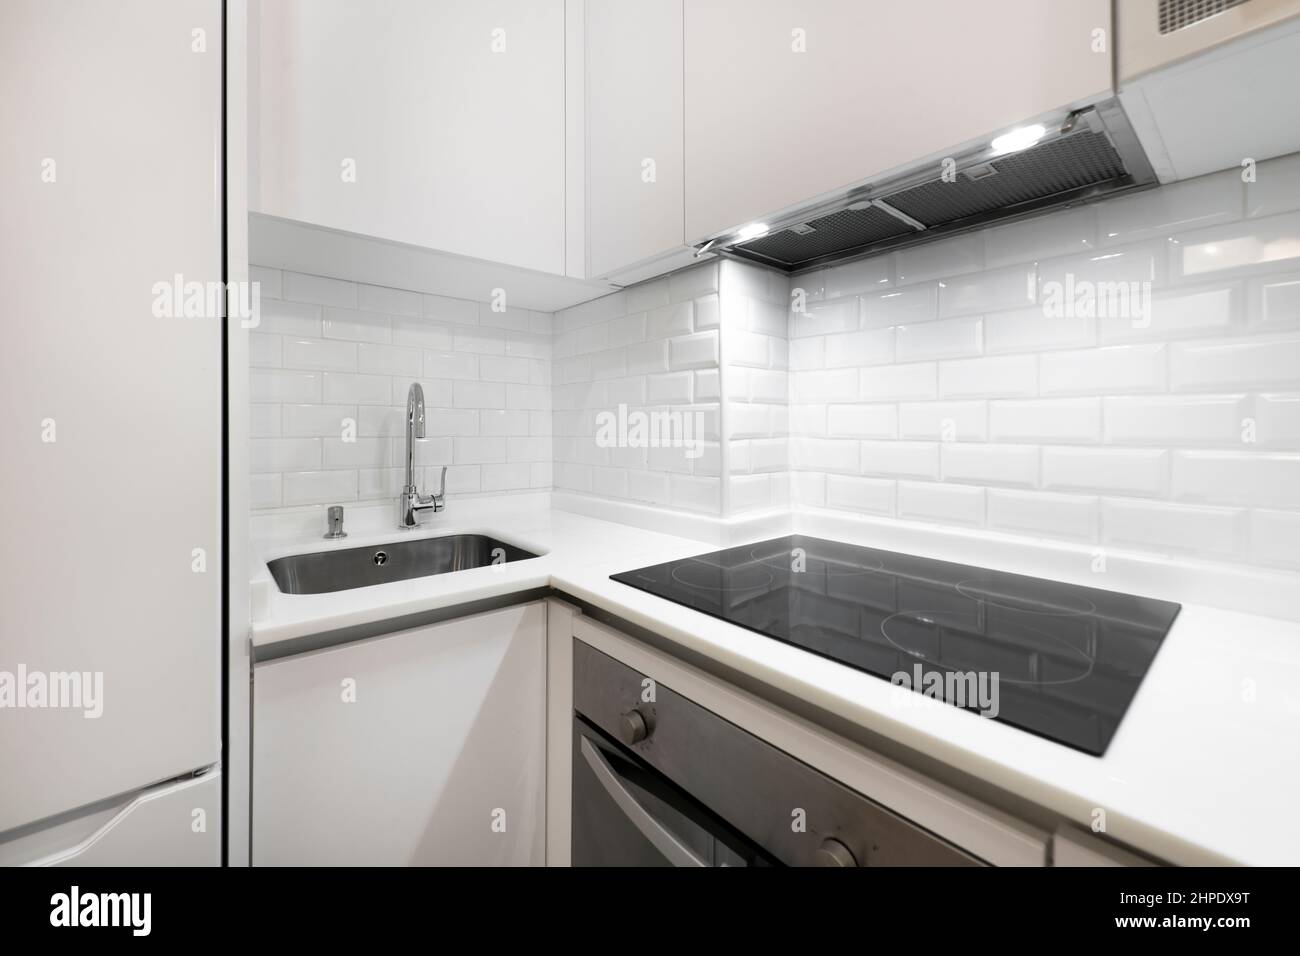 Corner of a modern kitchen with ceramic hob, extractor hood, stainless steel oven, sink embedded in the stone composite countertop Stock Photo